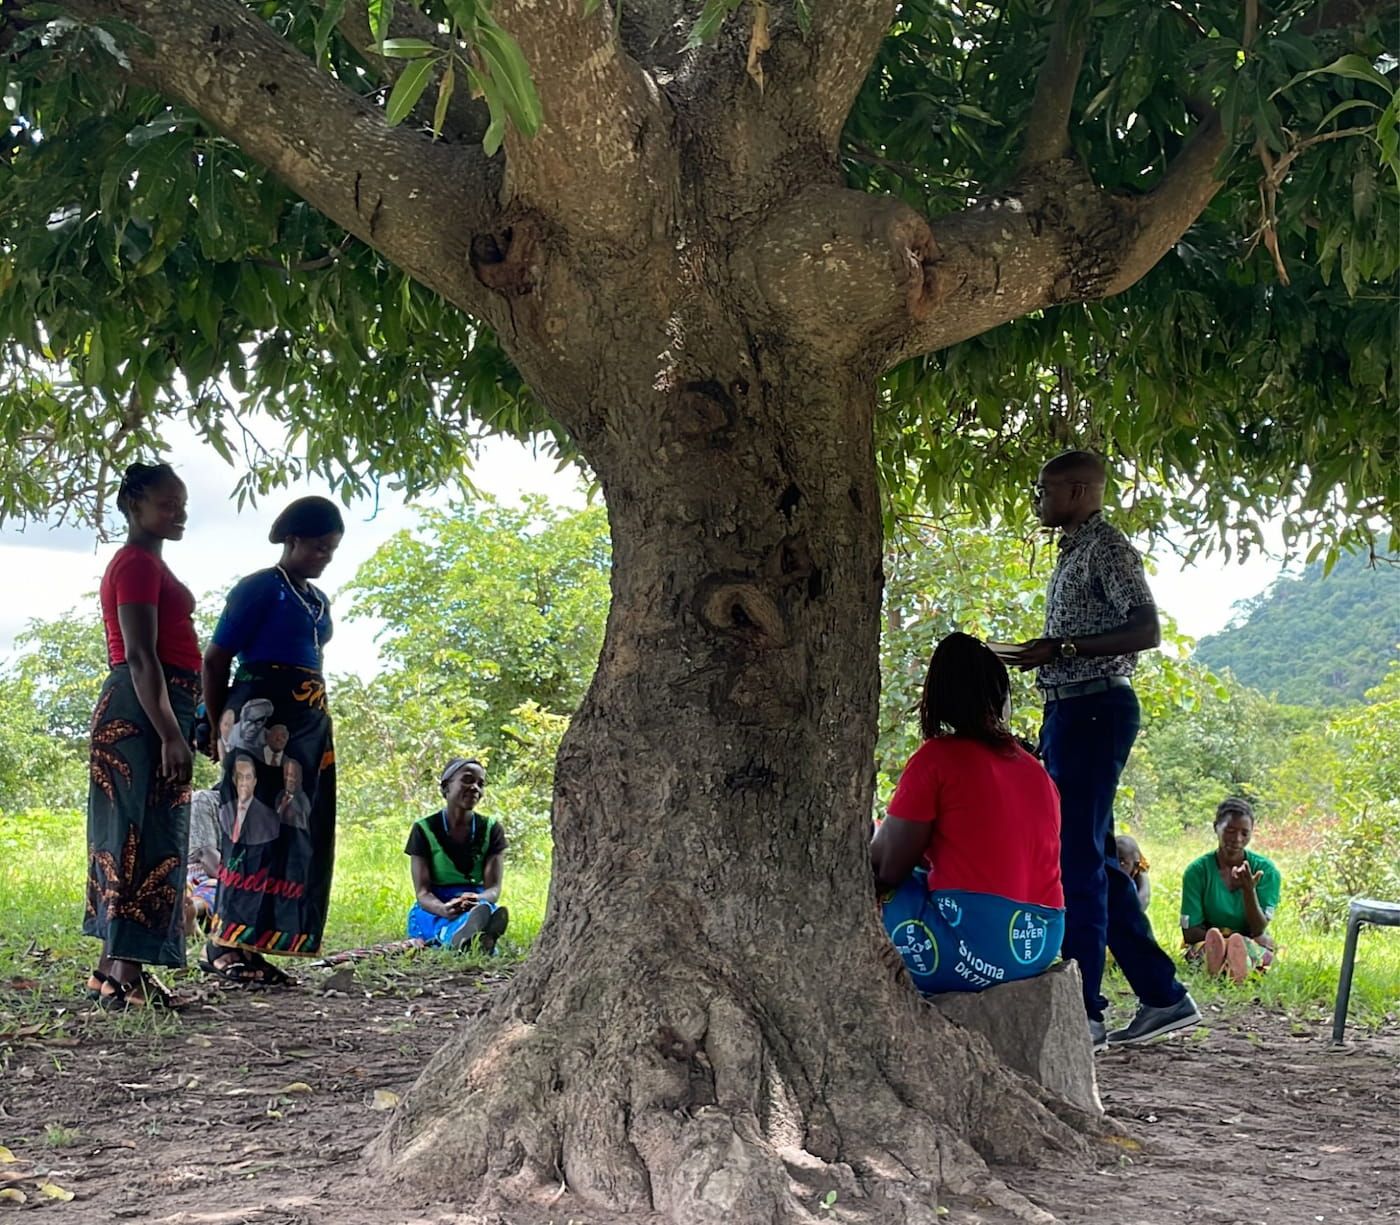 A group of people, including locals, in Zambia having a discussion beneath a tree.